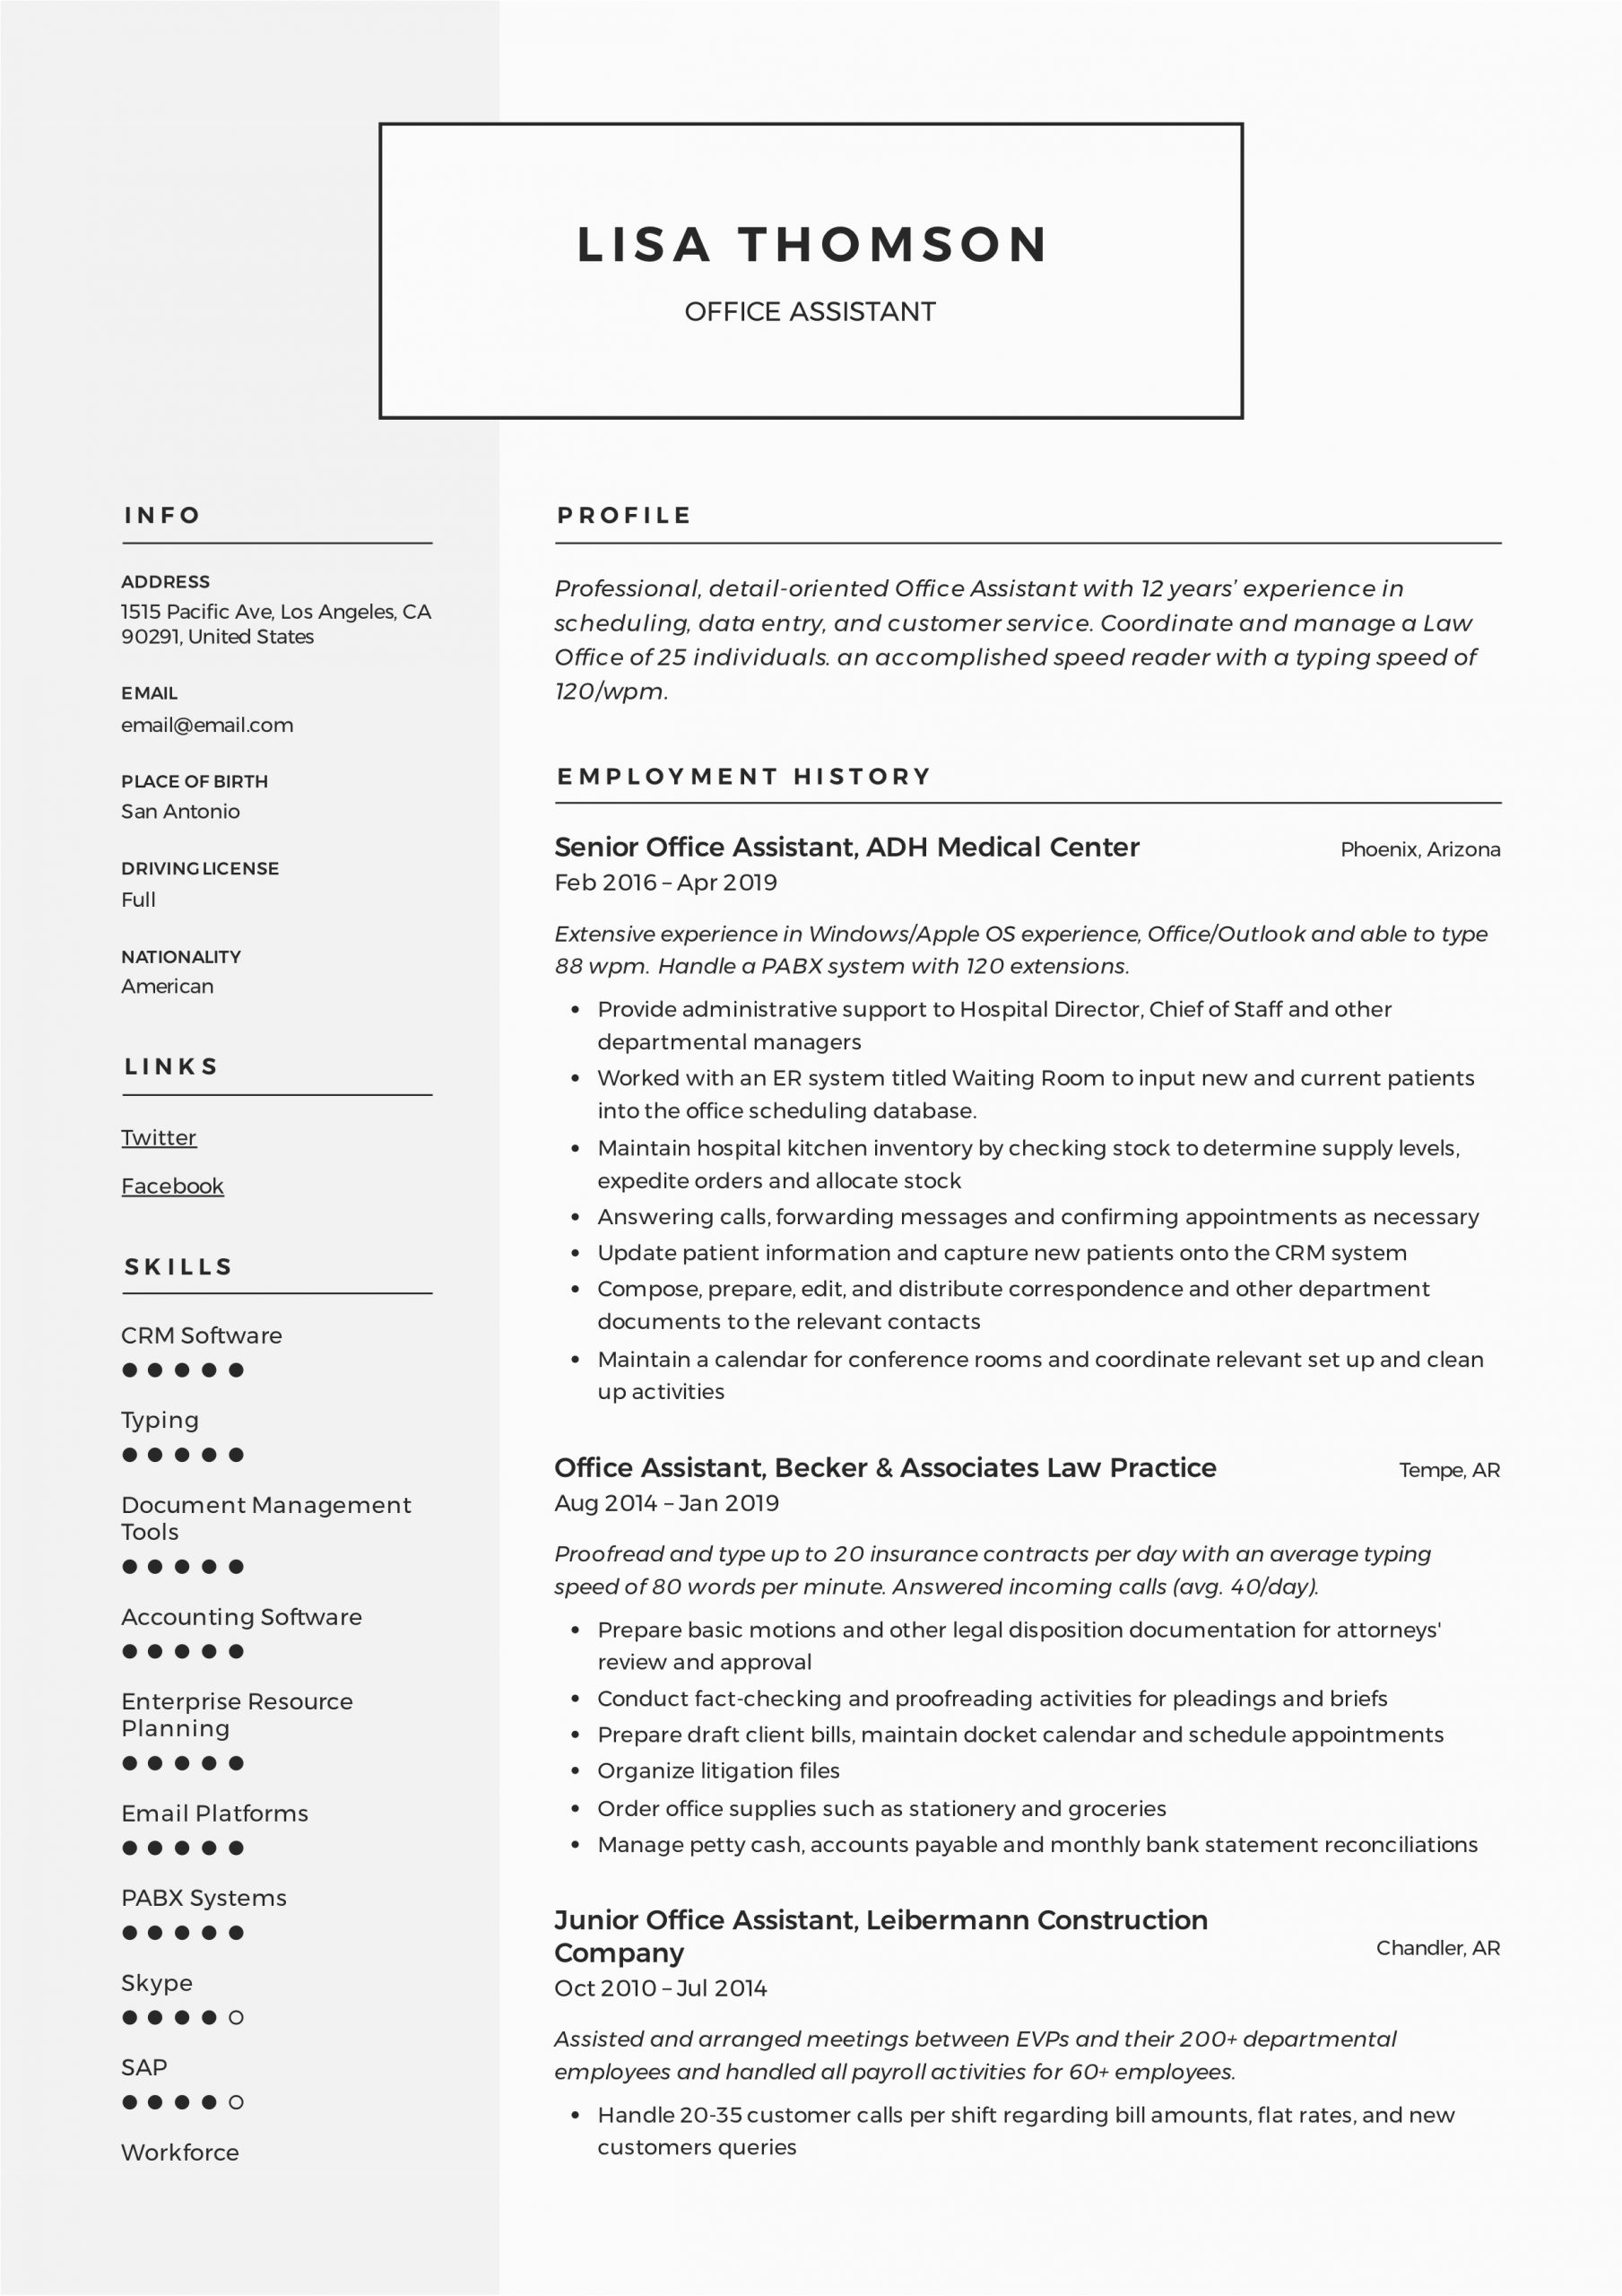 Resume Sample for Office assistant Position Fice assistant Resume Writing Guide